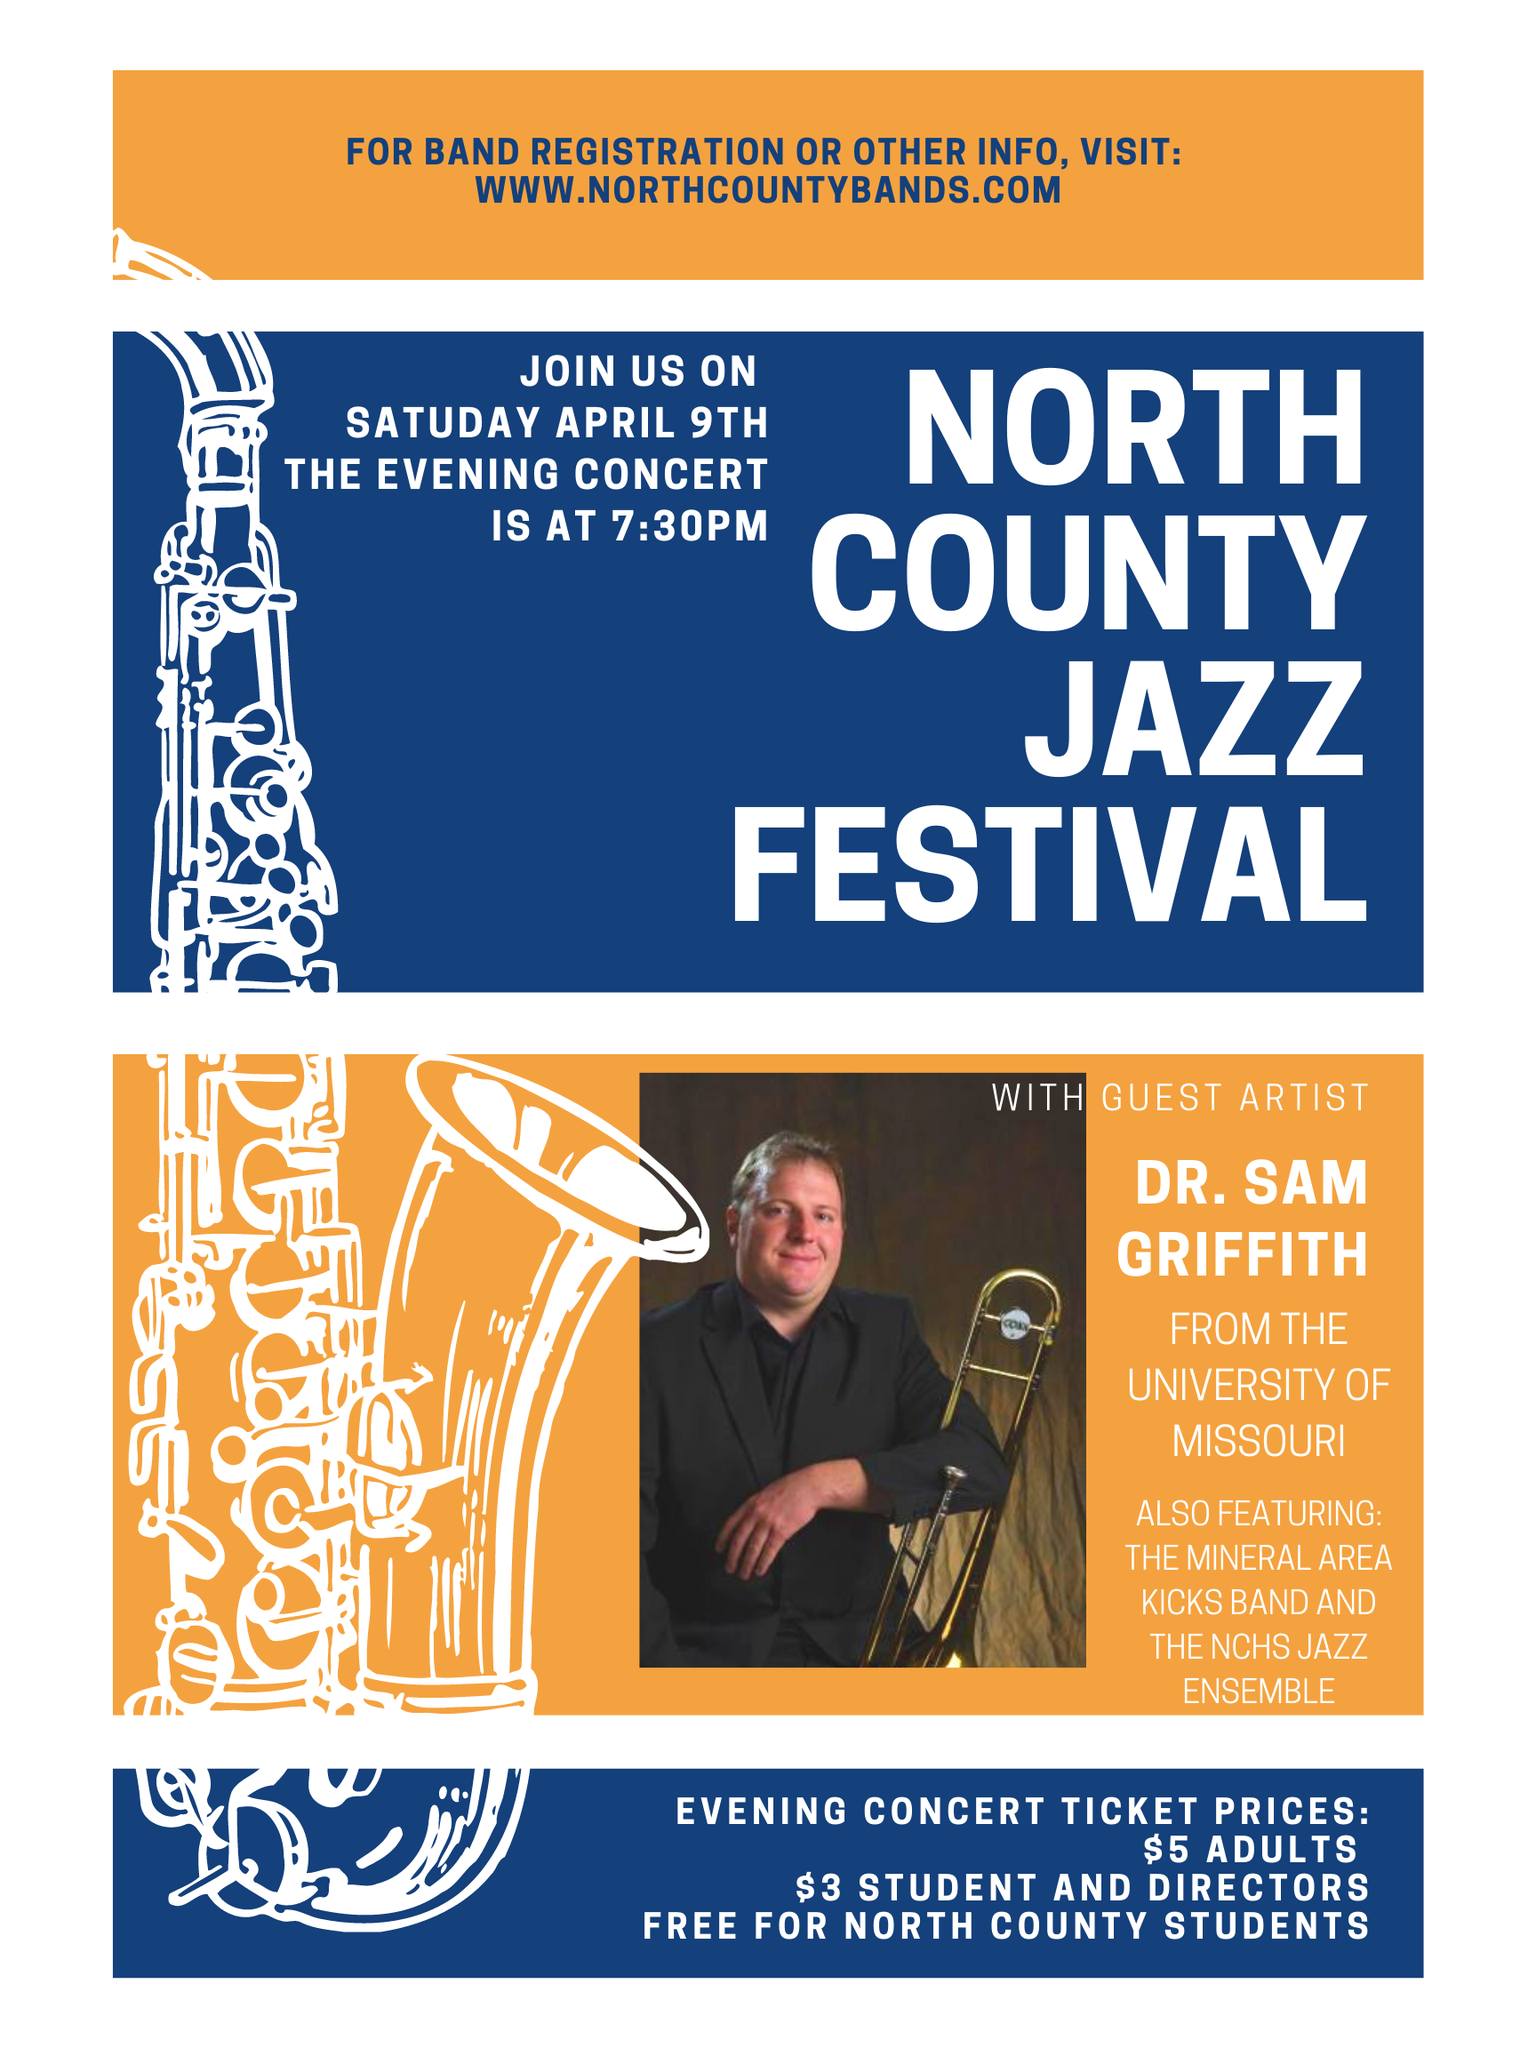 The North County Jazz Festival